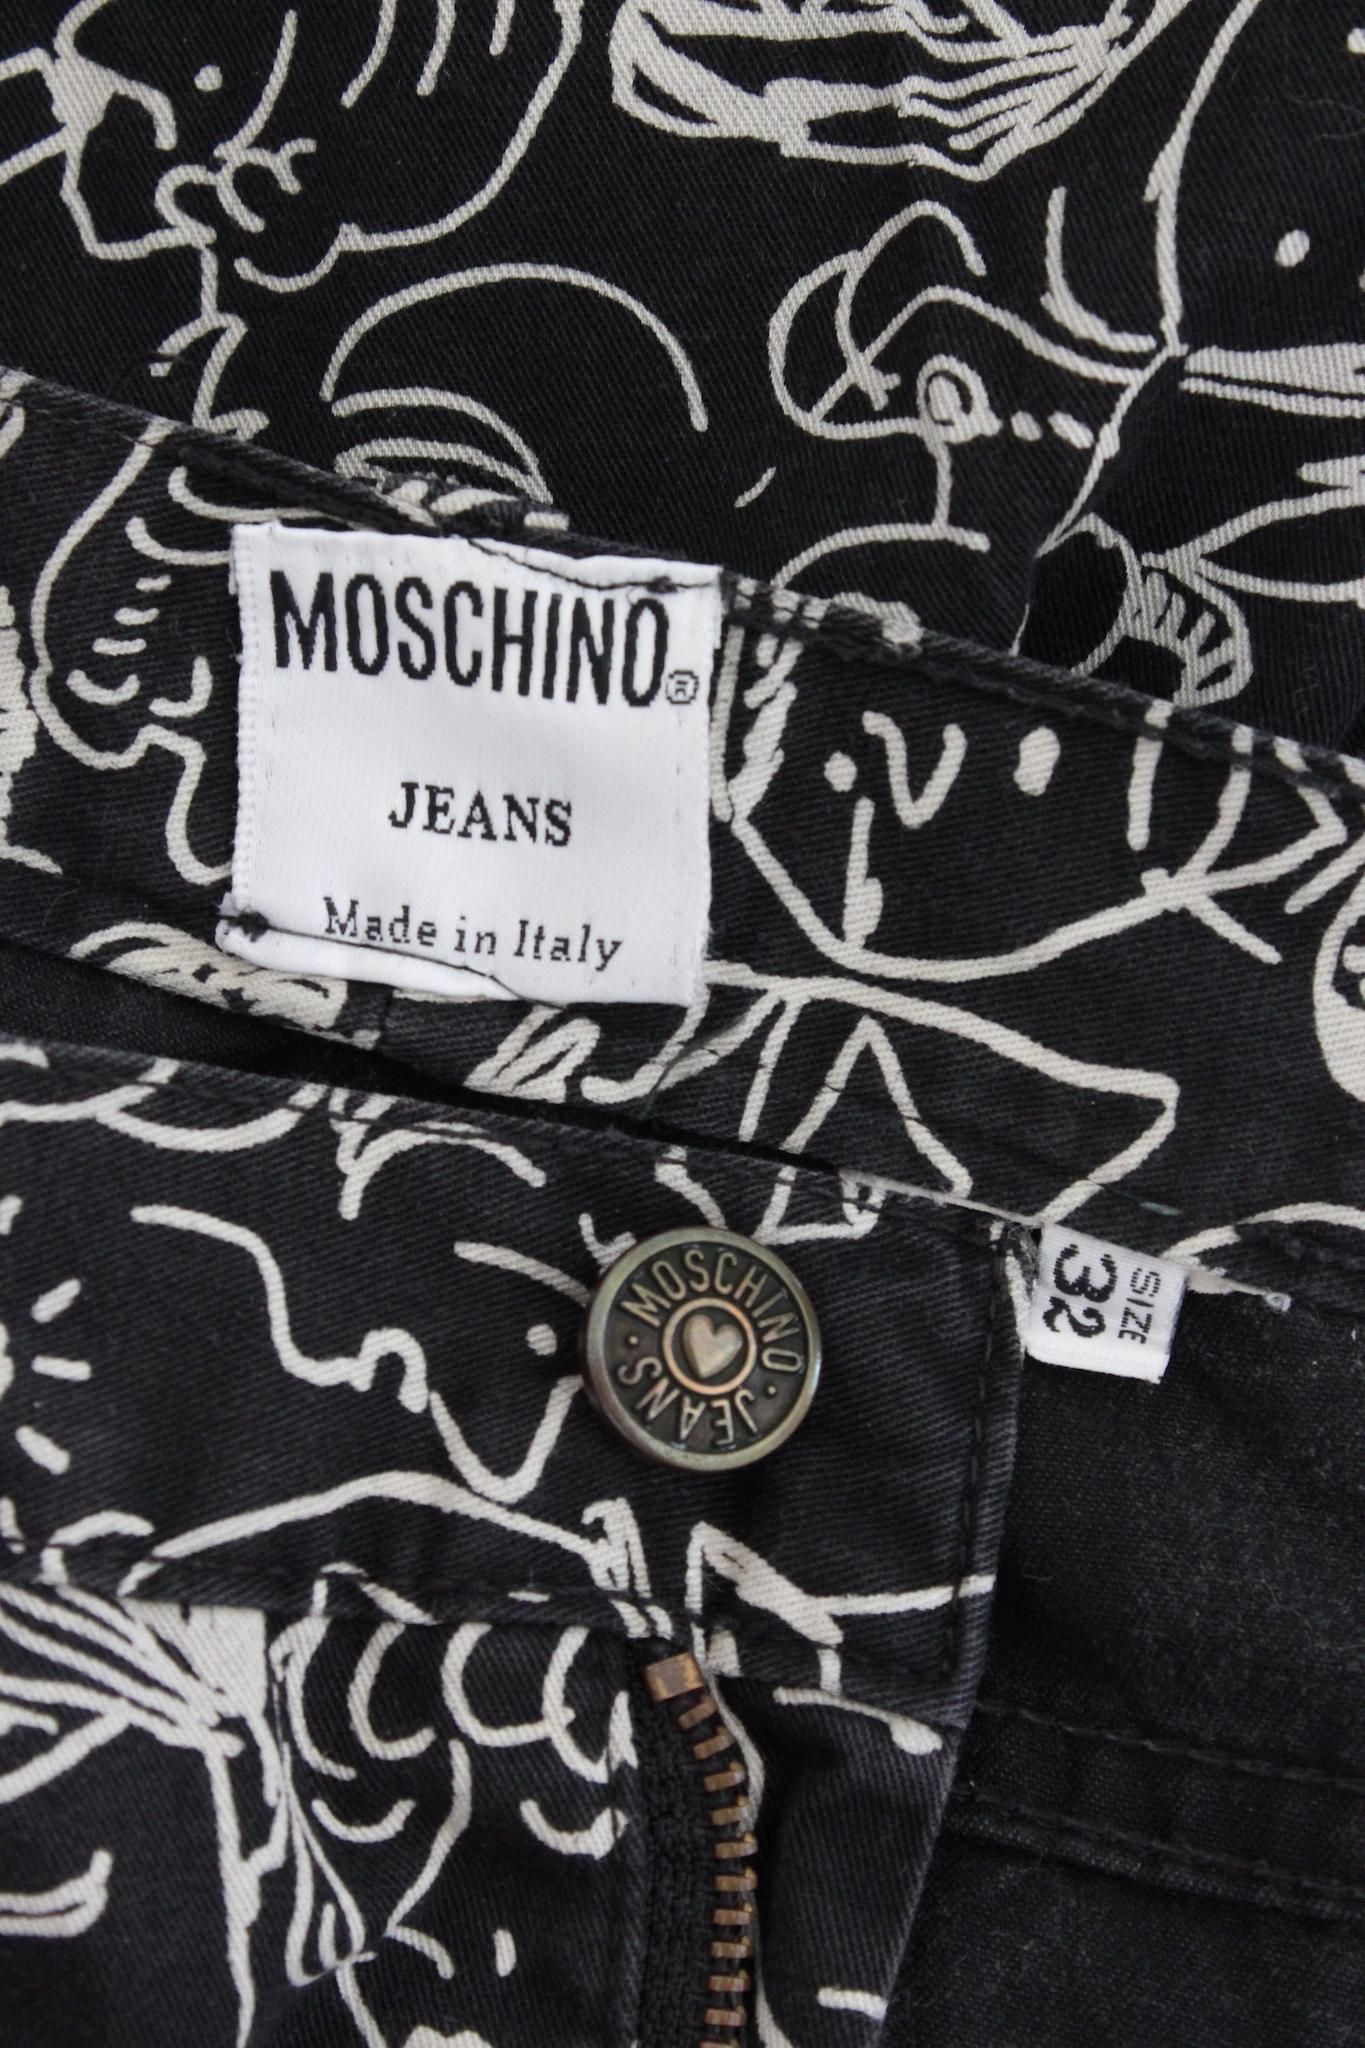 Moschino iconic trousers with cartoon pattern, vintage 90s. High waist model, ankle length, classic 5 pockets, black and white color. Cotton fabric. Made in italy.

Size: 38 It 32 Eu

Waist: 33 cm
Length: 99 cm
Internal length: 72 cm
Hem: 17 cm